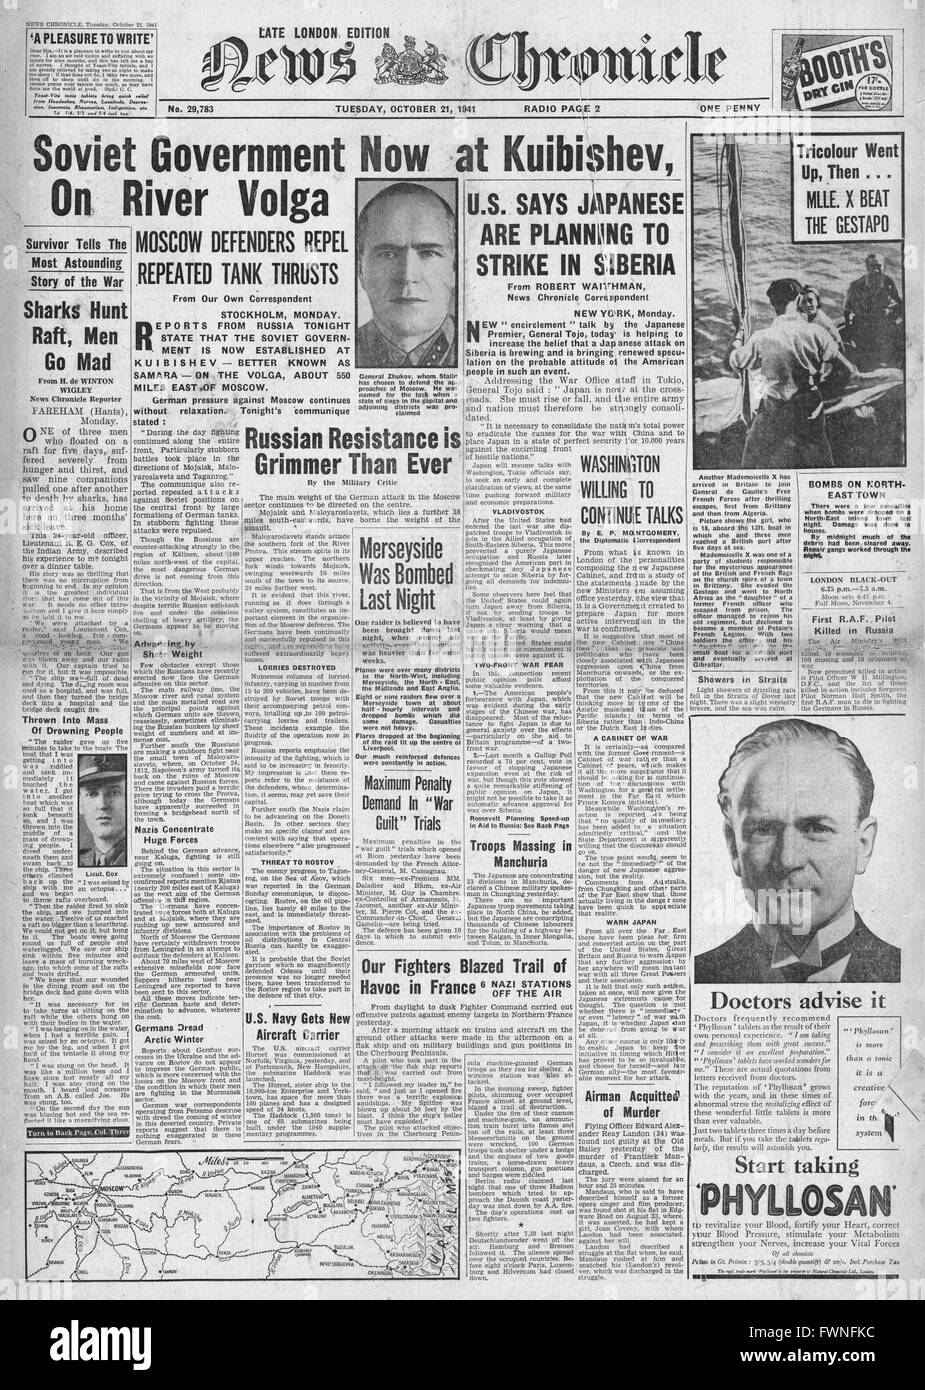 1941 front page News Chronicle Soviet Government at Kuibishev, Merseyside Bombed and Japanese Threat to Siberia Stock Photo